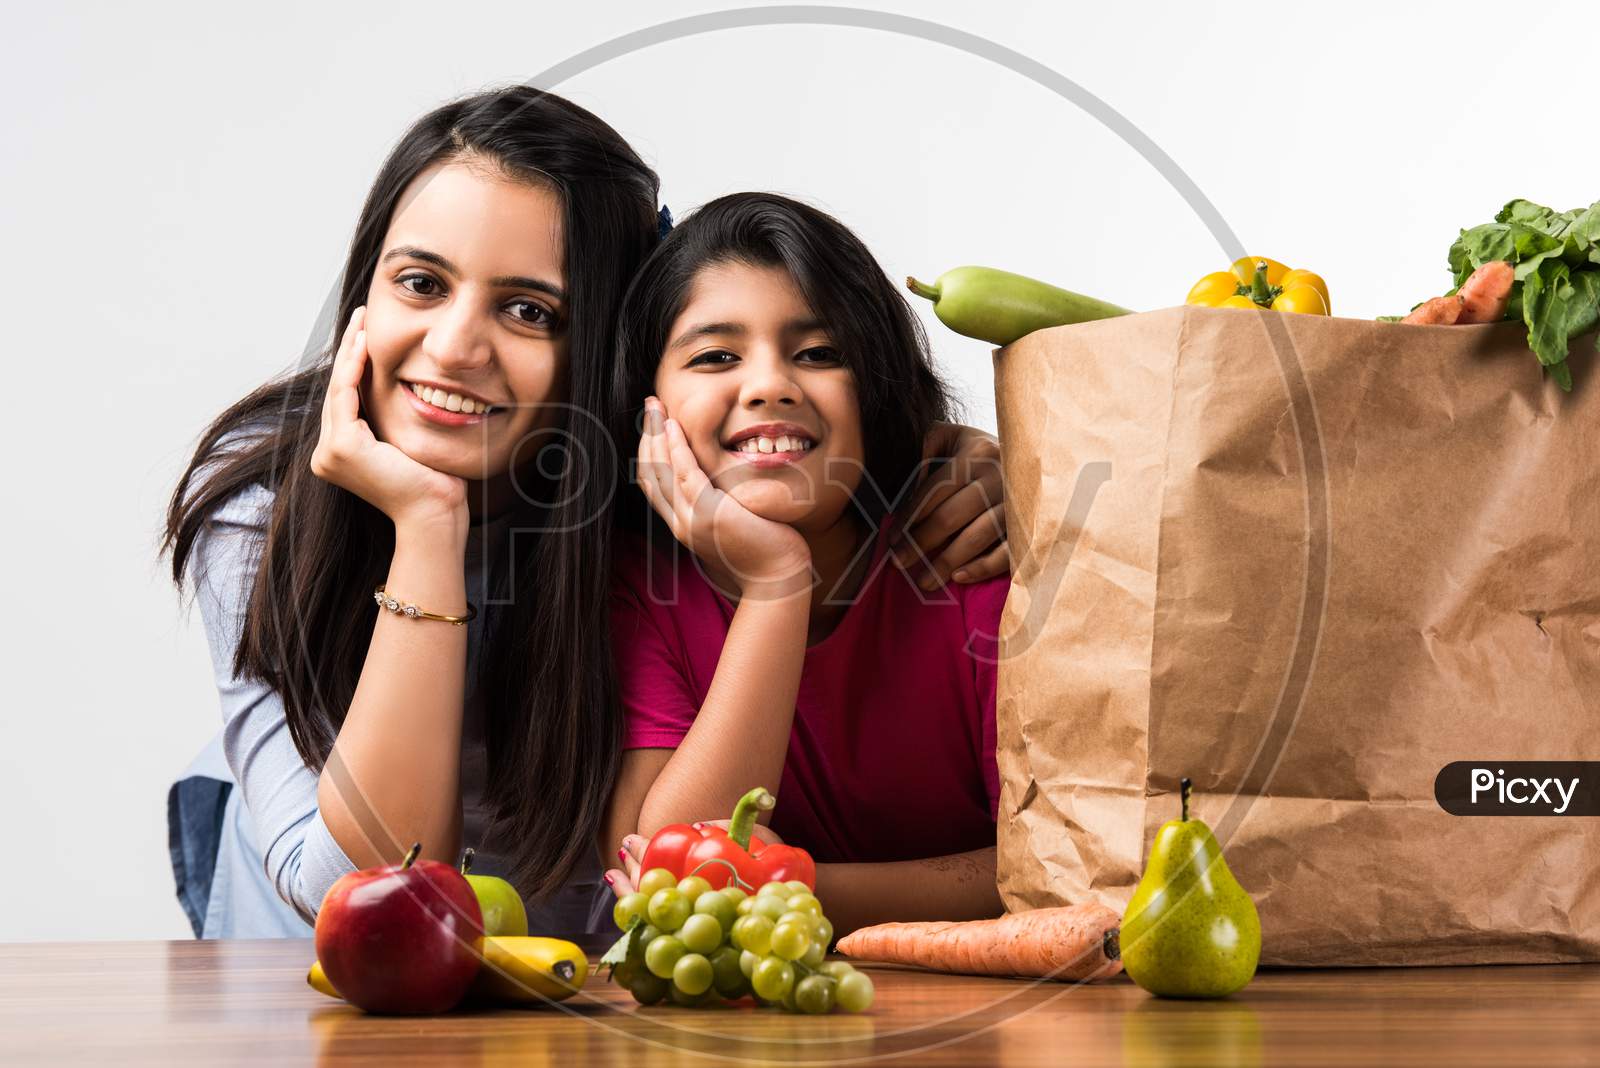 Happy Indian Family In The Kitchen. Pretty Mother & Cute Daughter Posing With Vegetables And Fruits